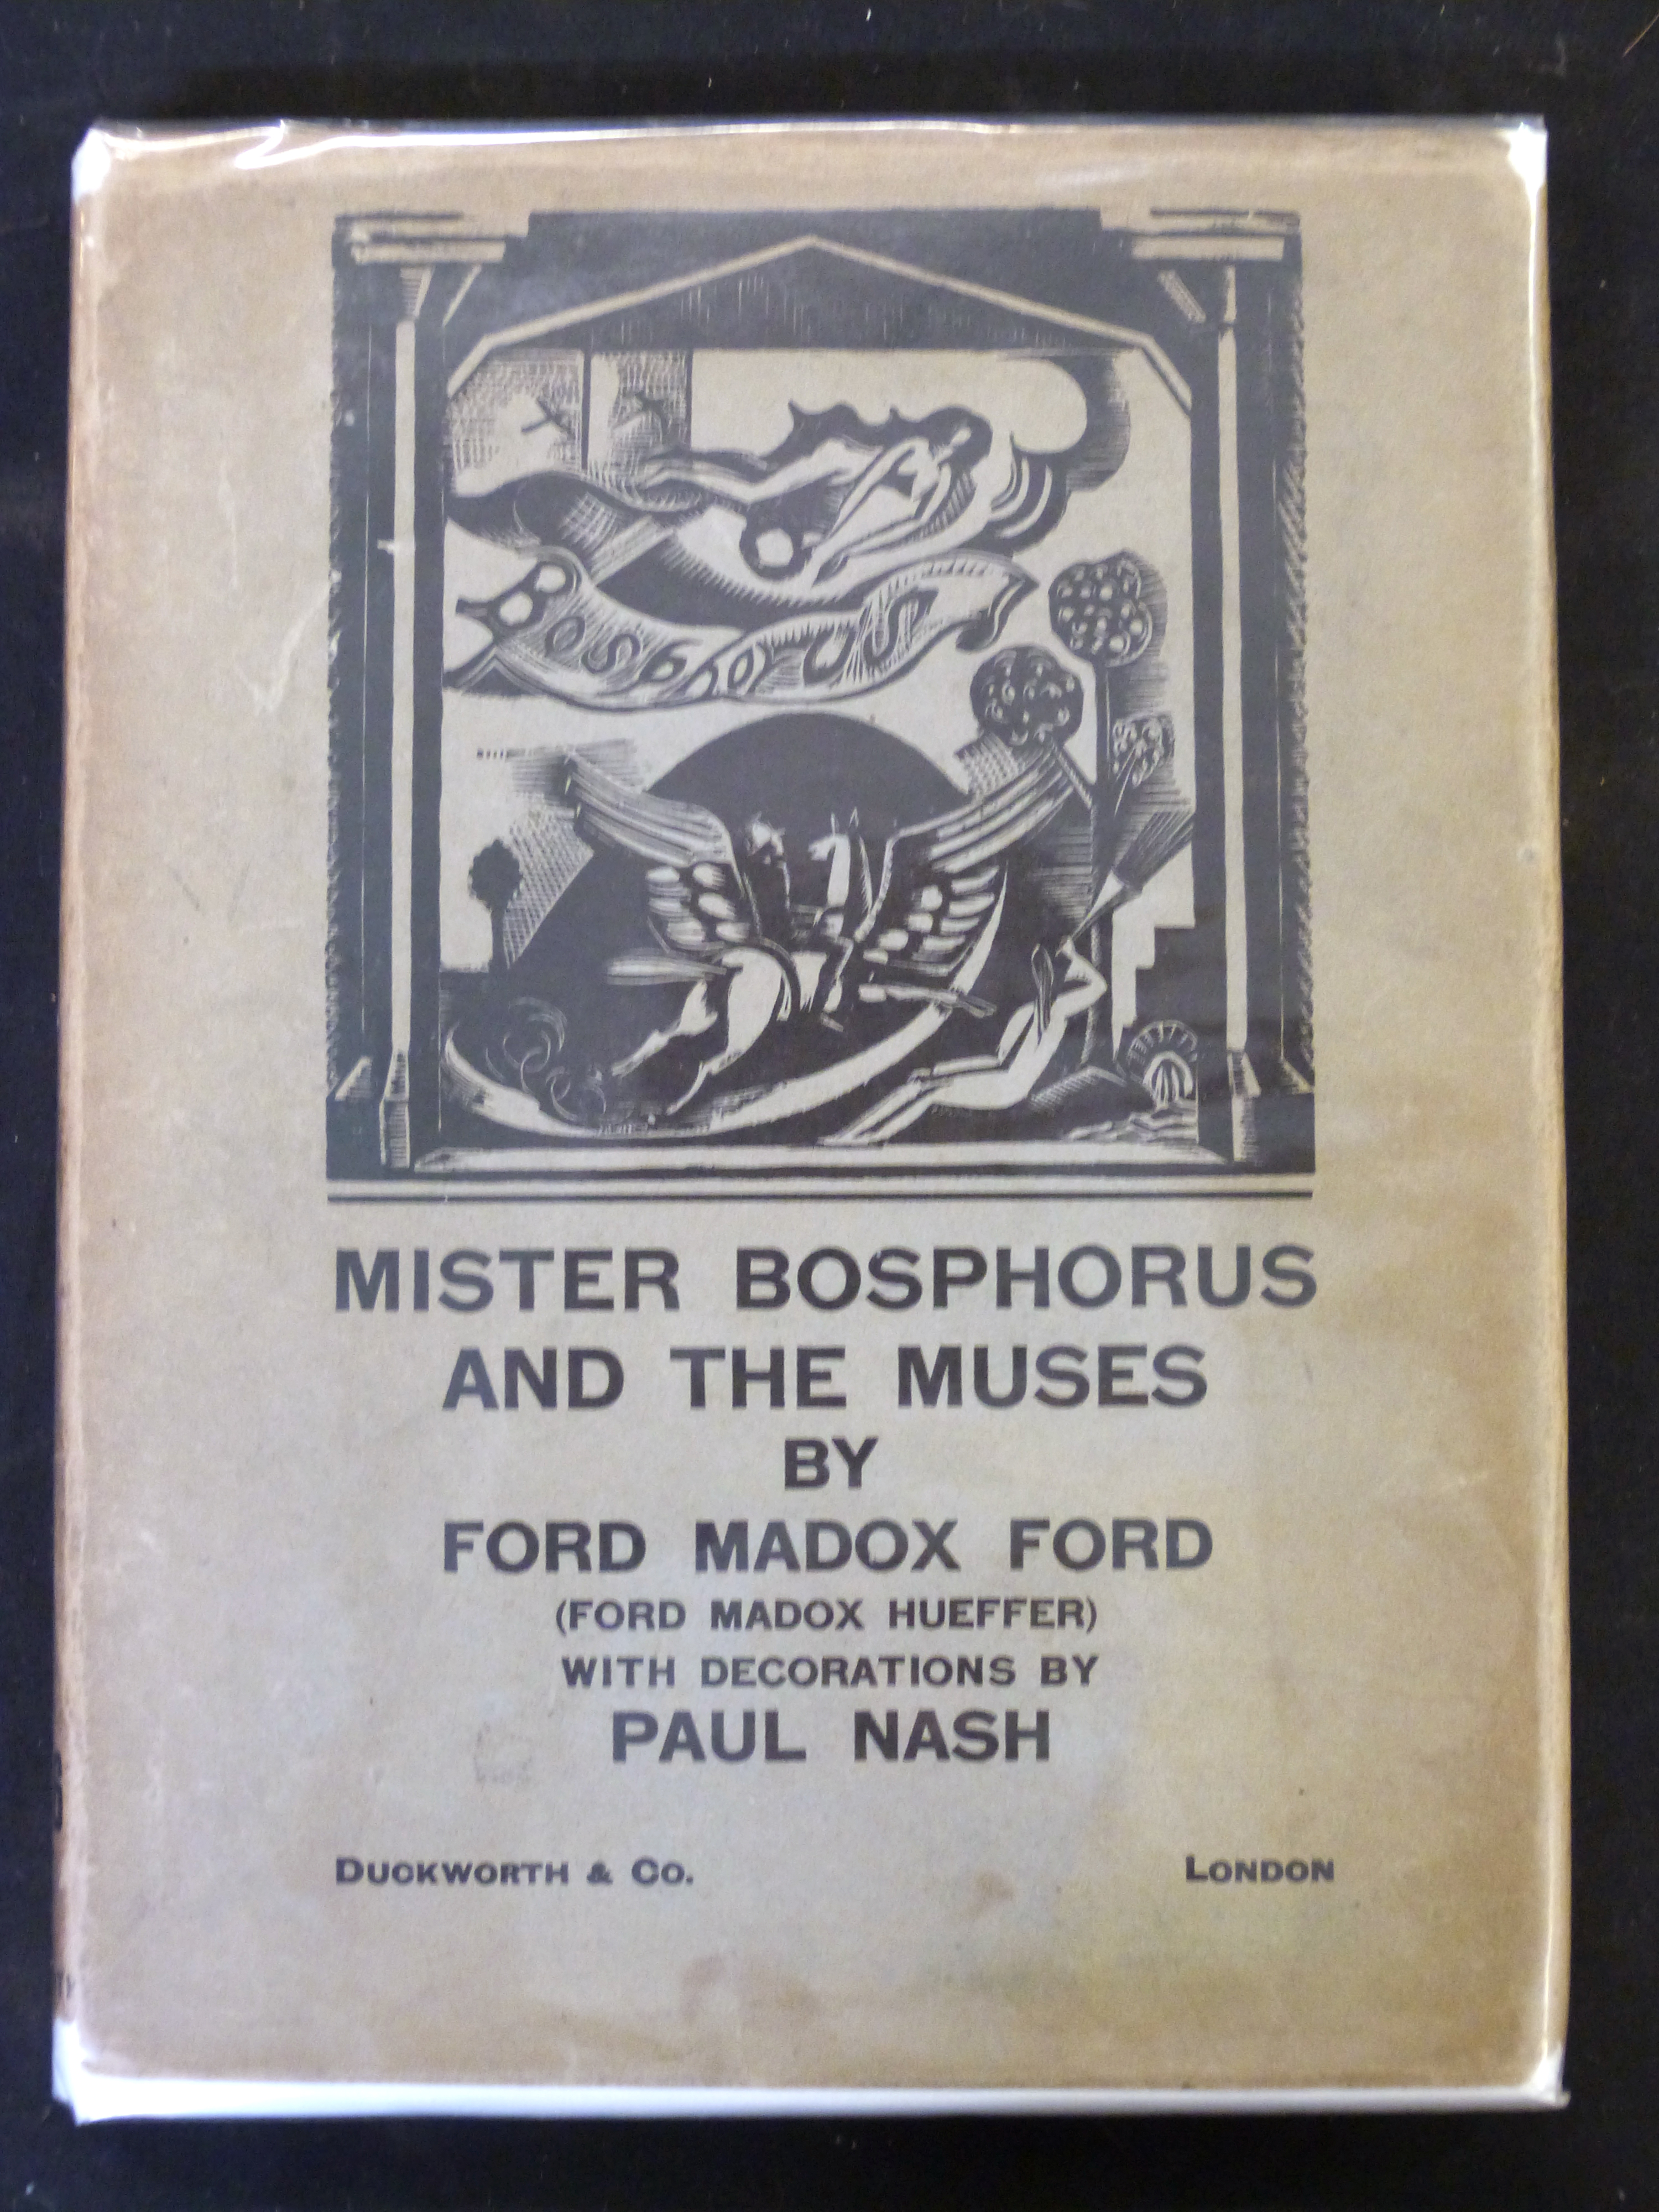 FORD MADOX FORD: MISTER BOSPHORUS AND THE MUSES..., ill Paul Nash, London, Duckworth, 1923, 1st